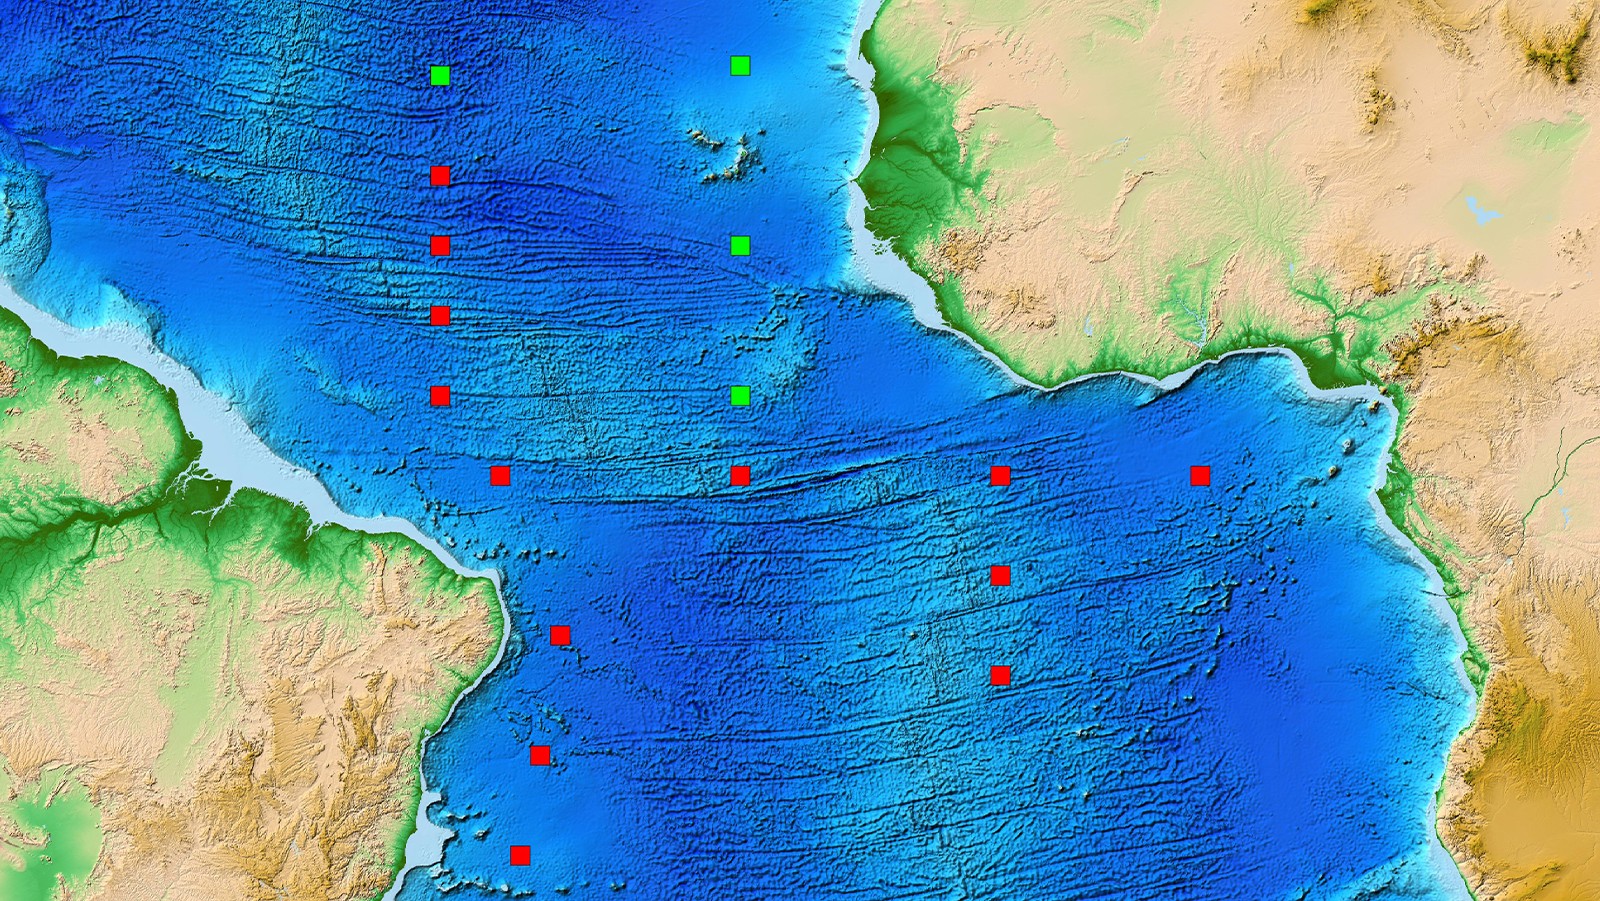 Map of locations for PIRATA buoys in the Atlantic Ocean between South America and Africa. Red squares represent PIRATA buoys, green squares represent Northeast extension PIRATA buoys.